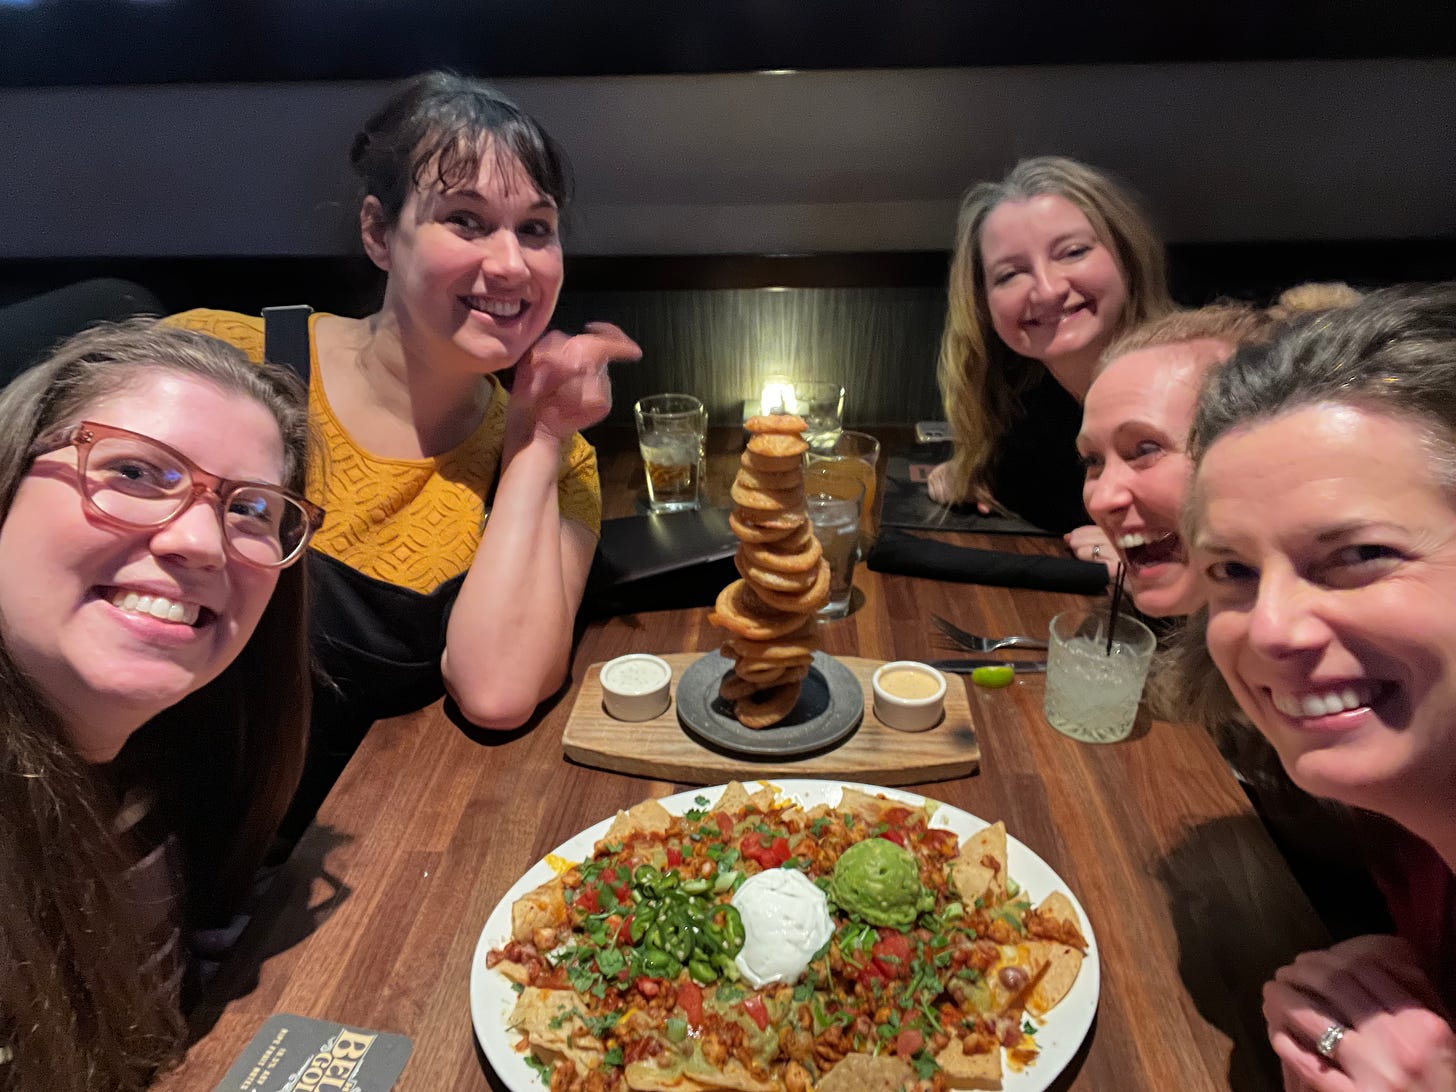 5 smiling women around a table; on the table is a giant stack of onion rings and a huge plate of nachos